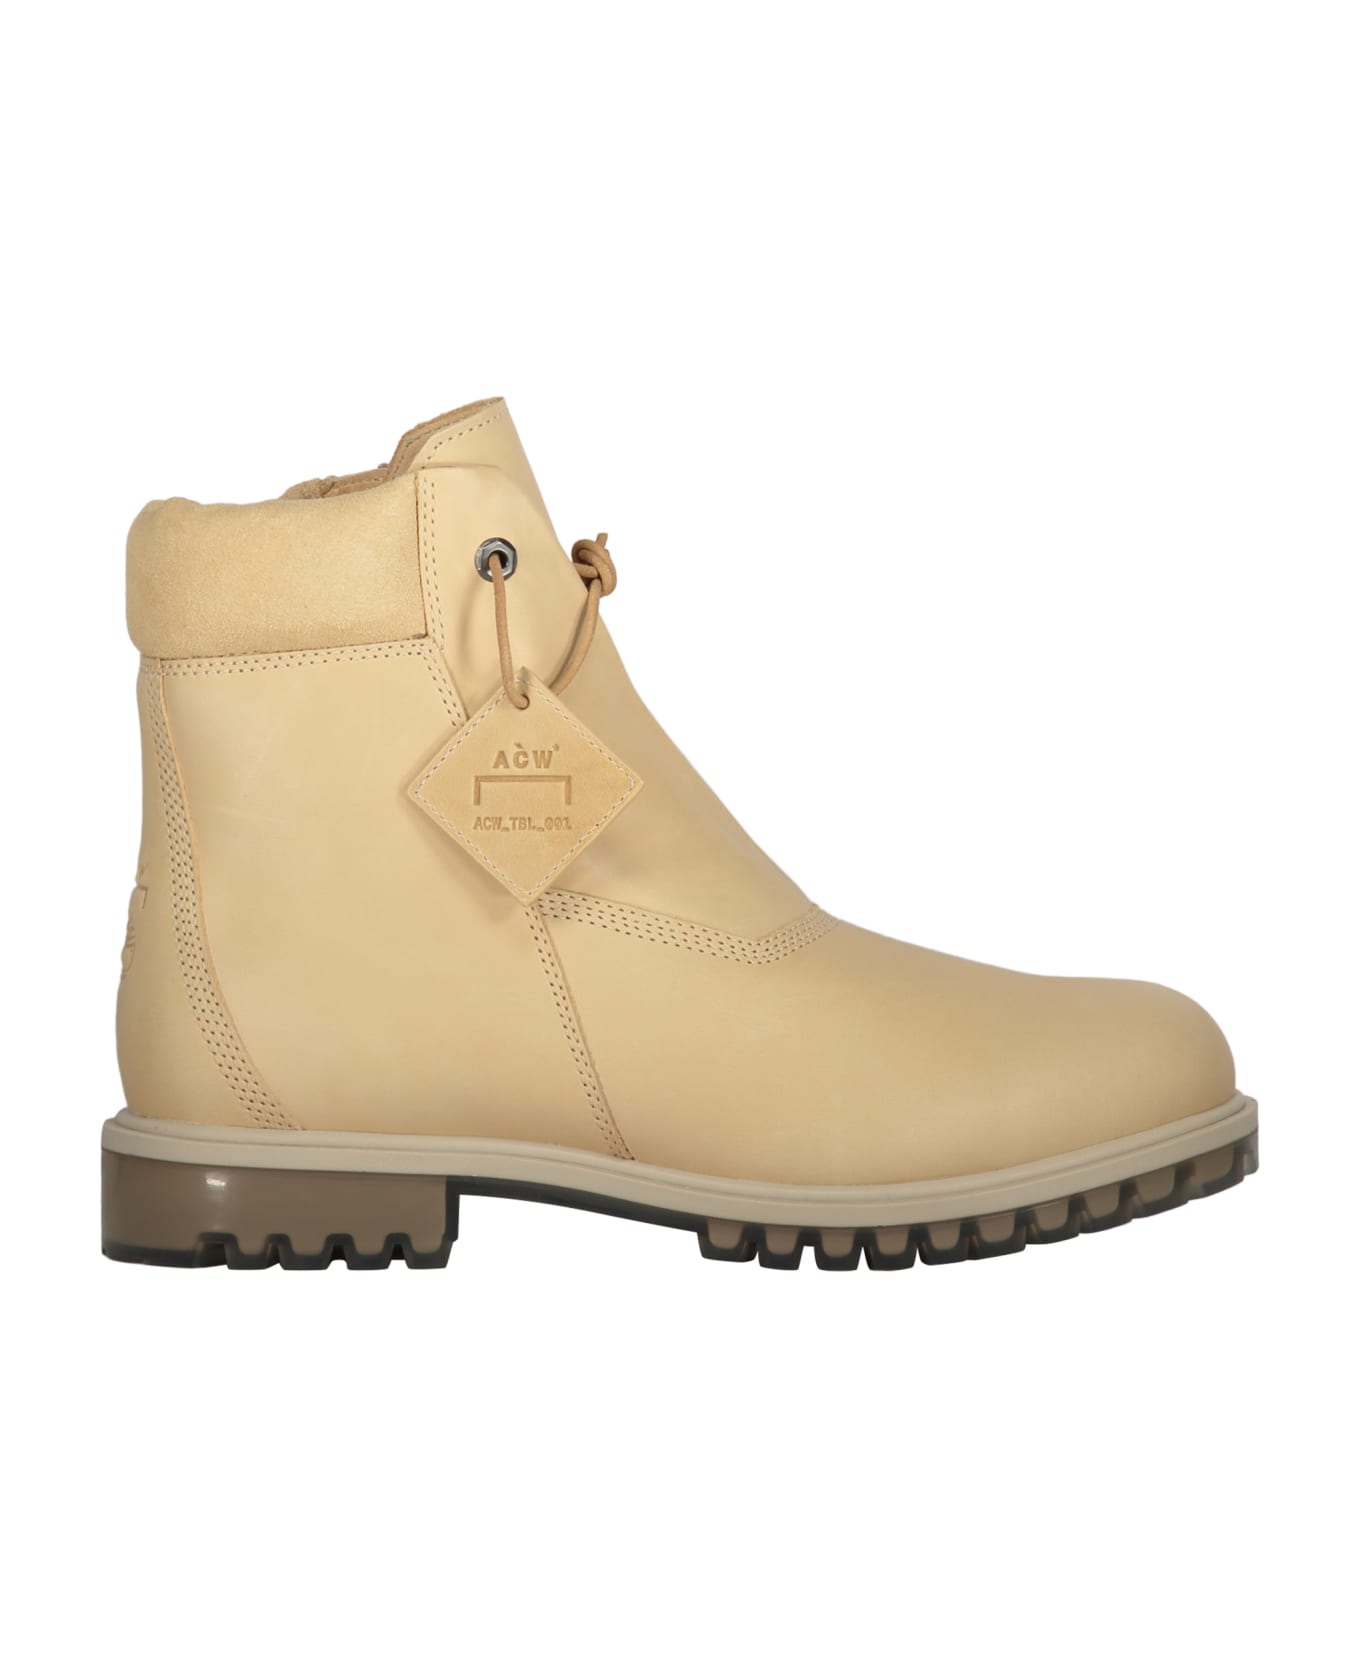 A-COLD-WALL Leather Boots - Sand